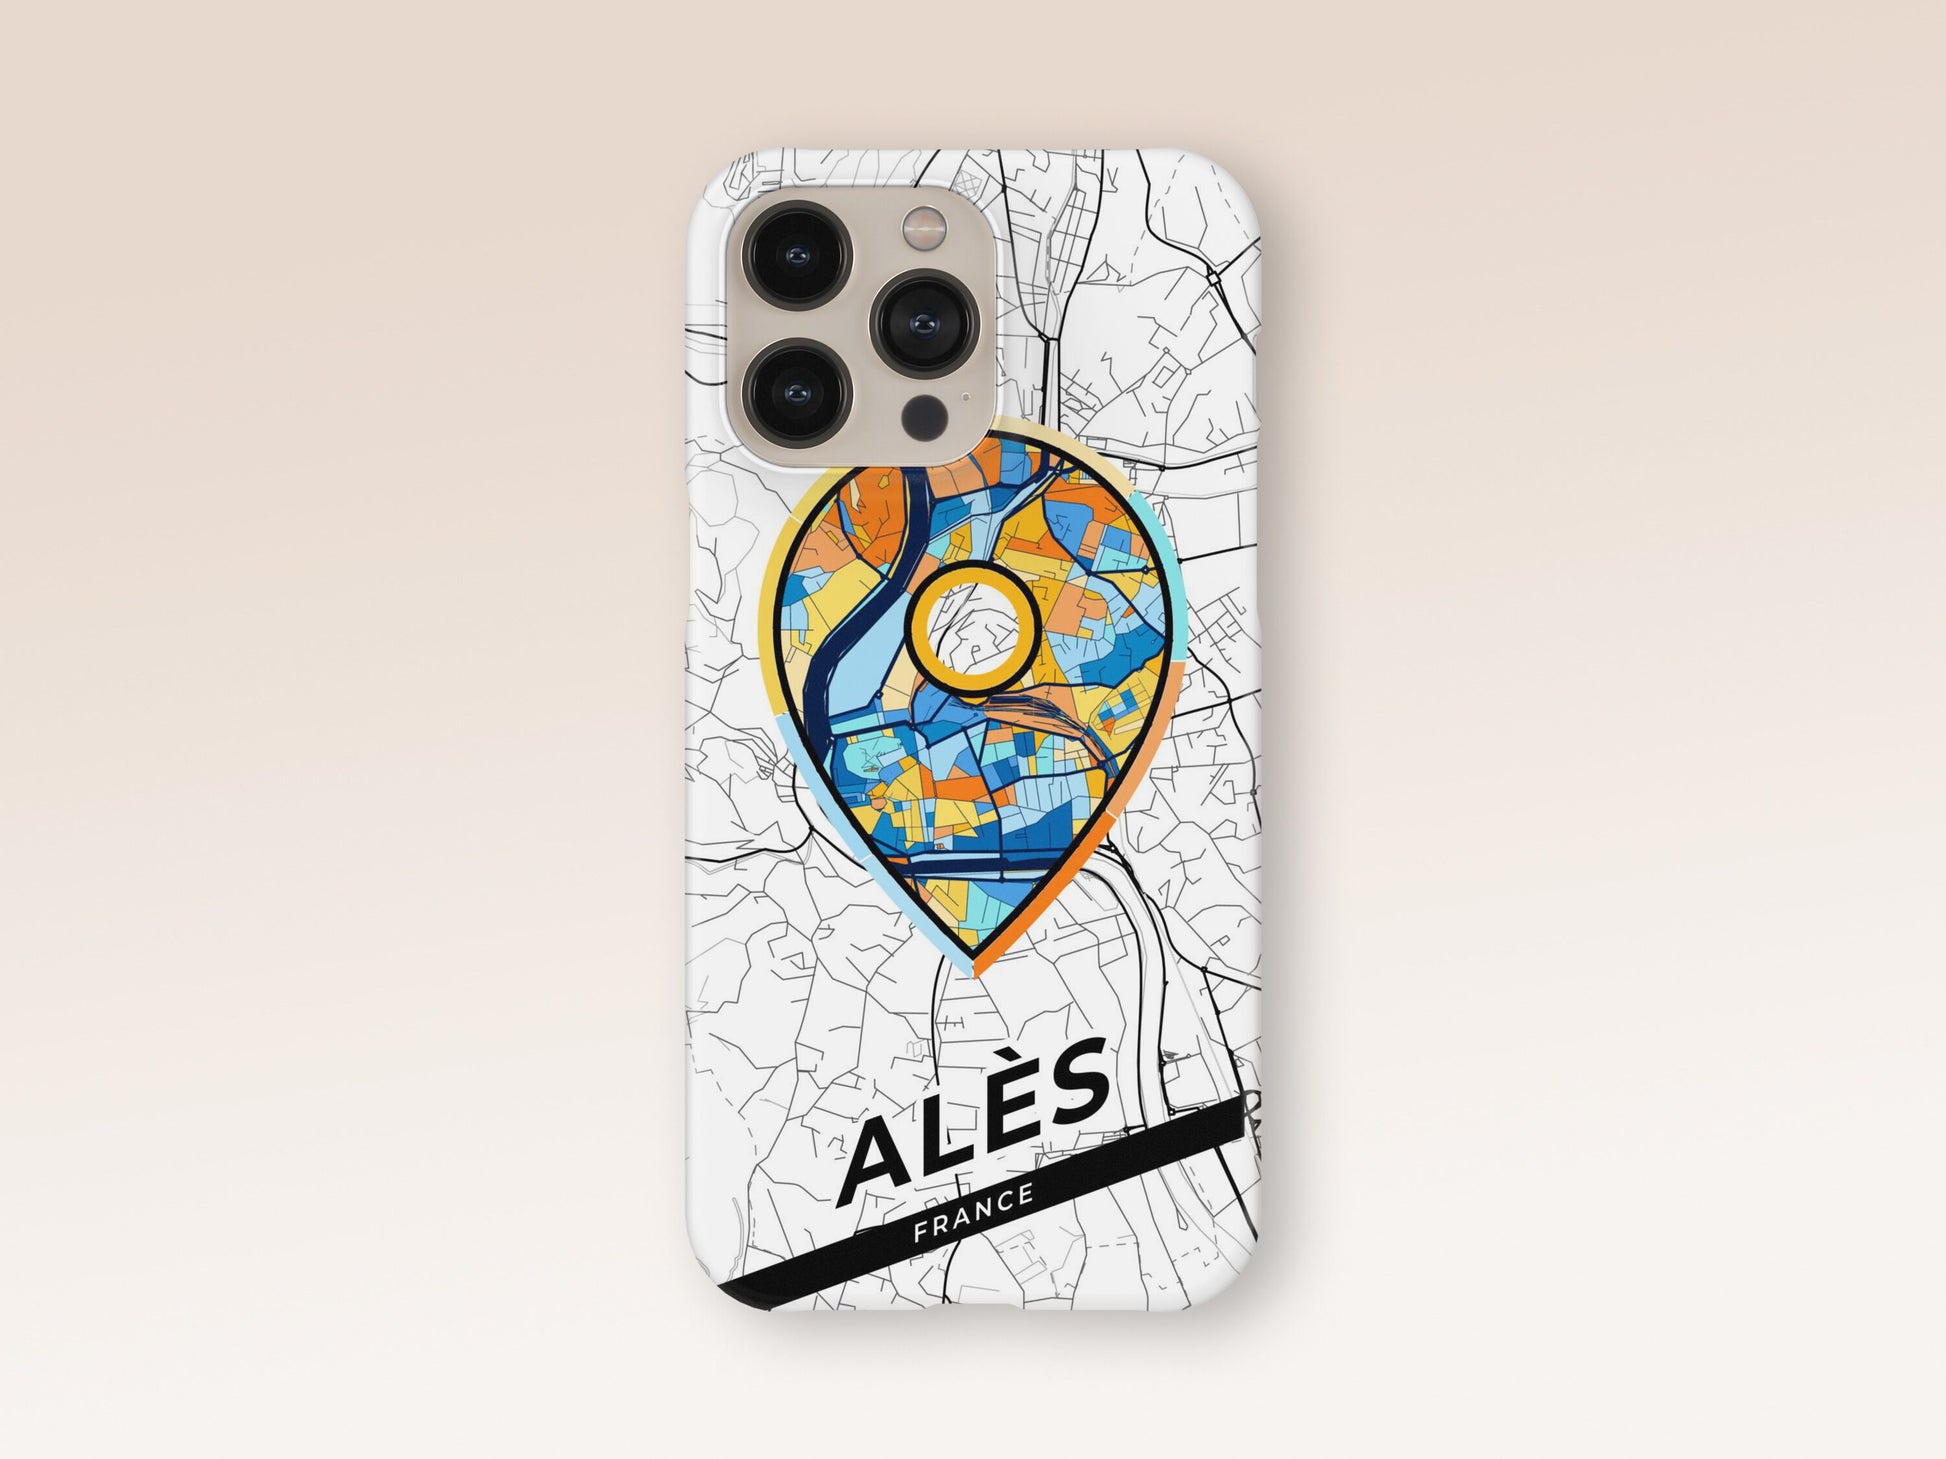 Alès France slim phone case with colorful icon. Birthday, wedding or housewarming gift. Couple match cases. 1